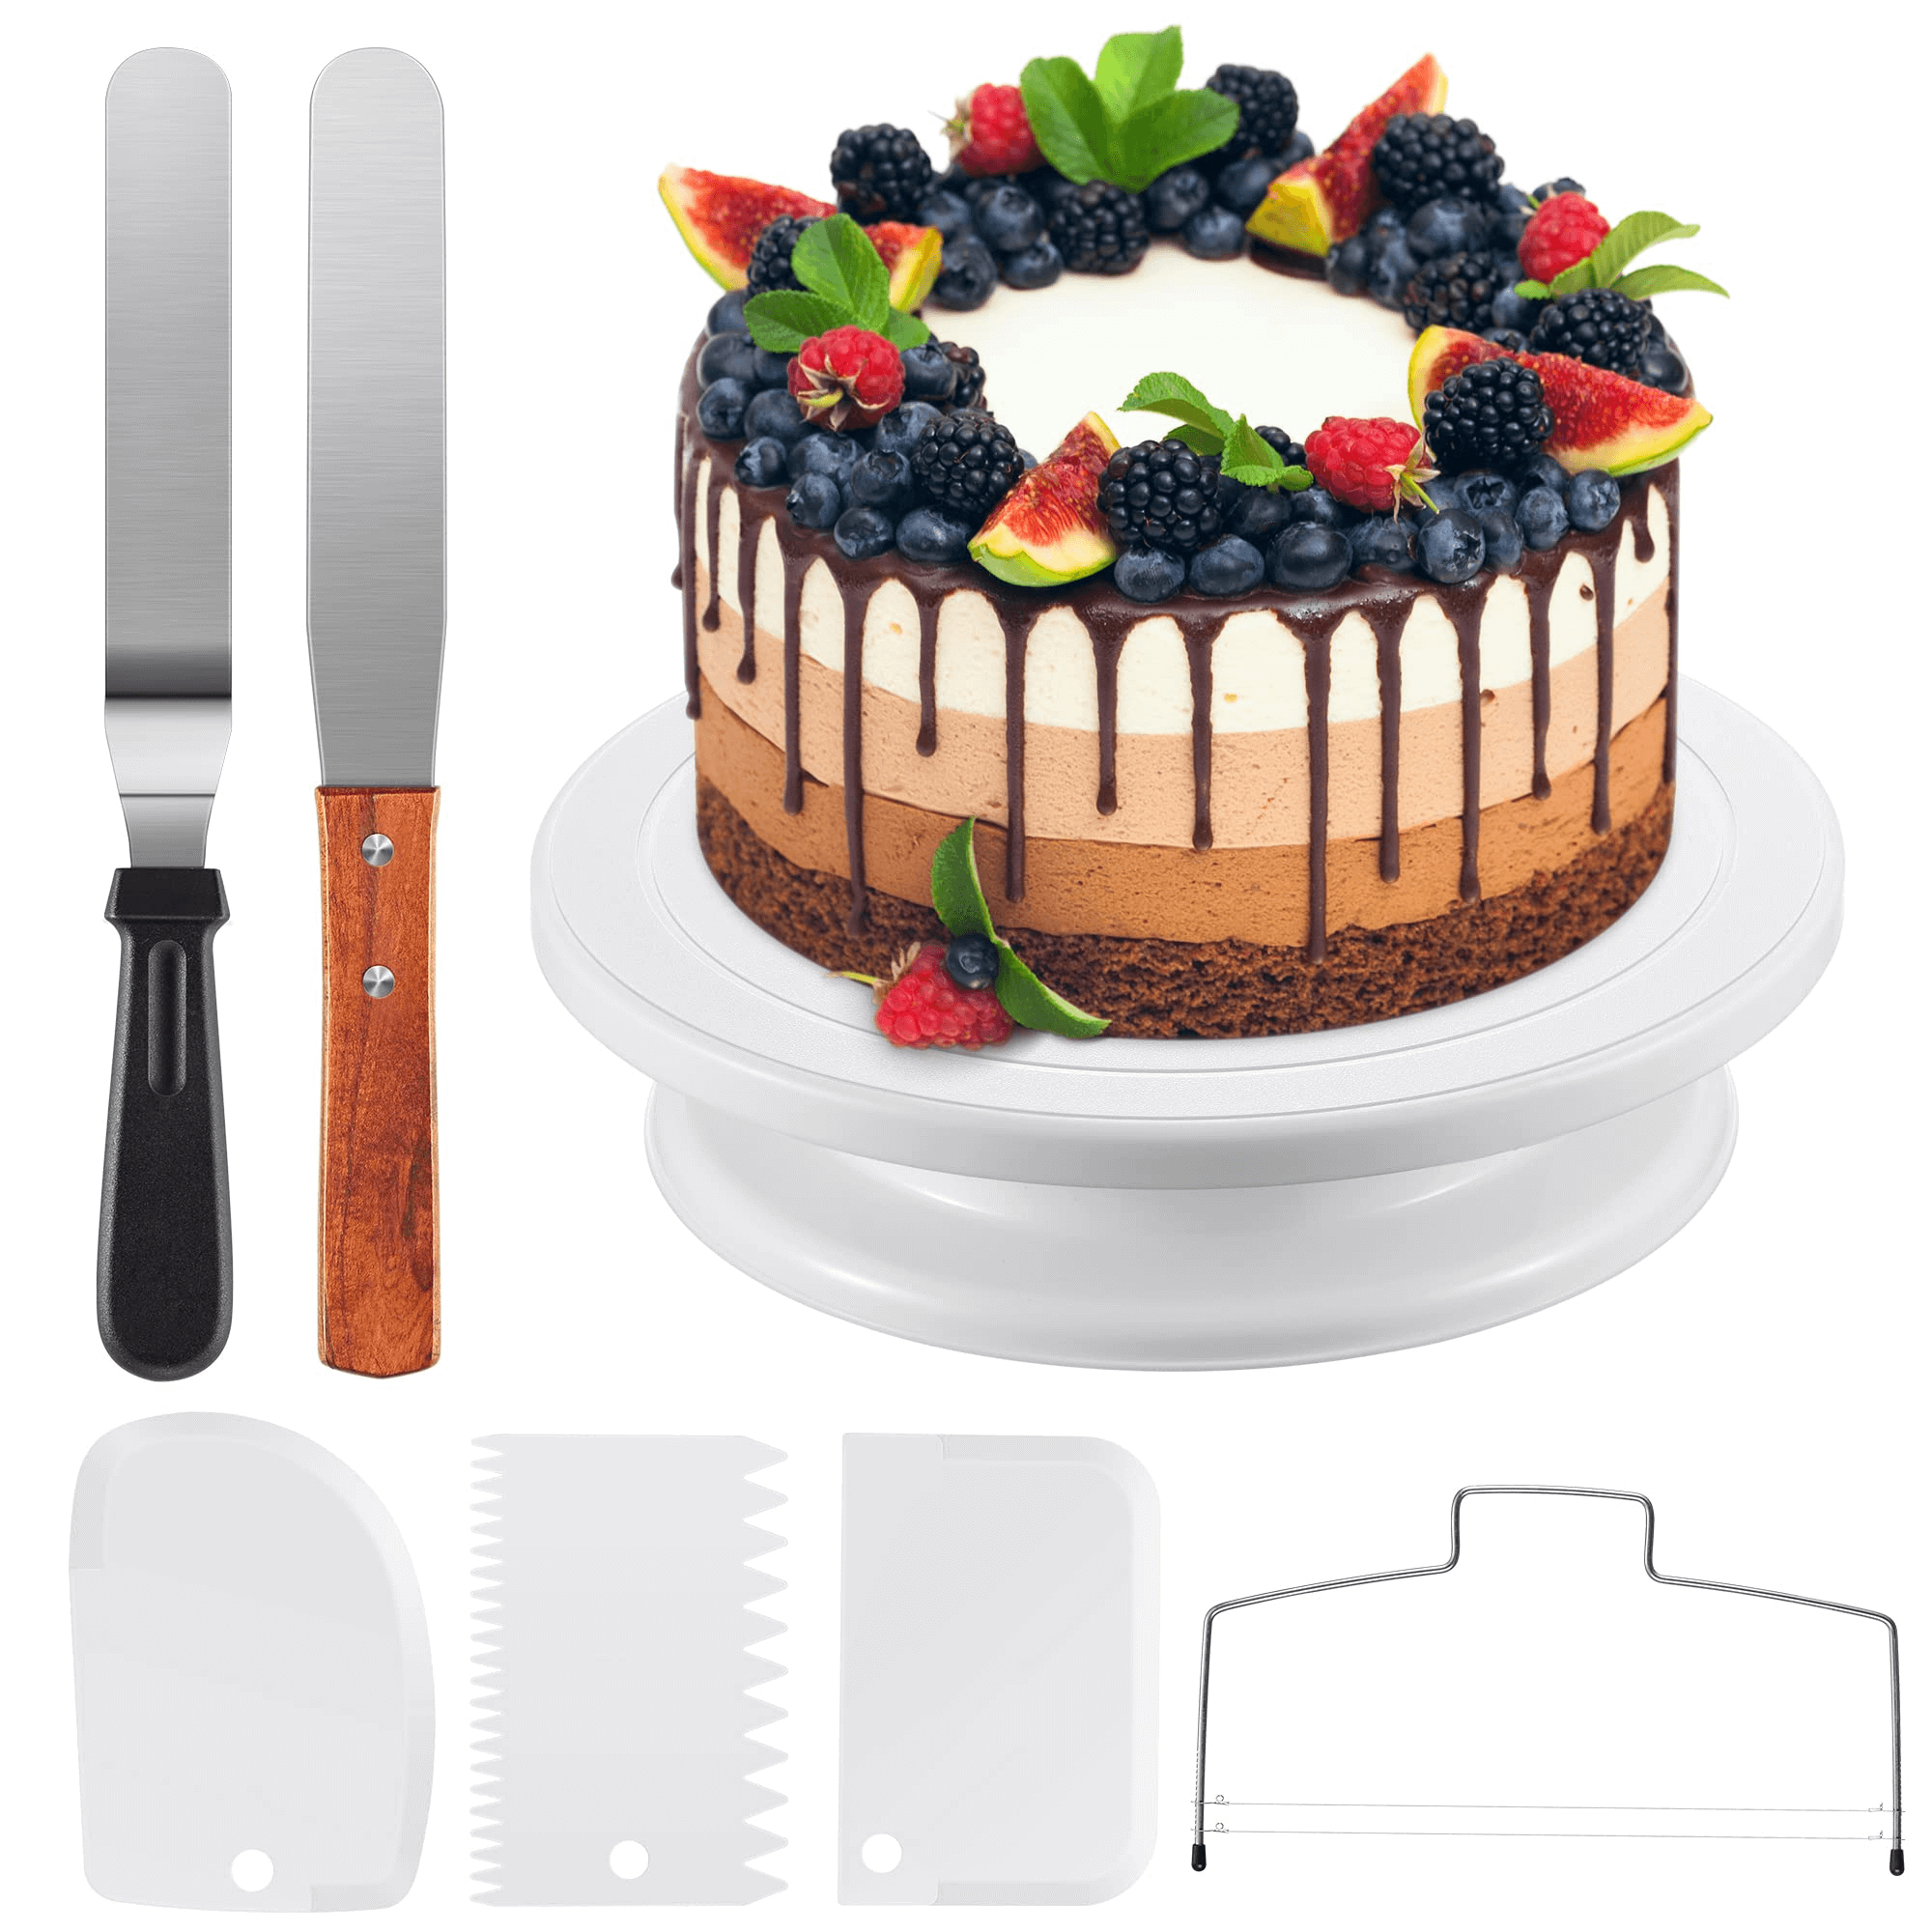 KUYUEOR 10 Inch Rotating Cake Turntable,Turns Smoothly,Revolving Cake Stand  Cake Decorating Kit Display Stand Baking Tools for Cookies